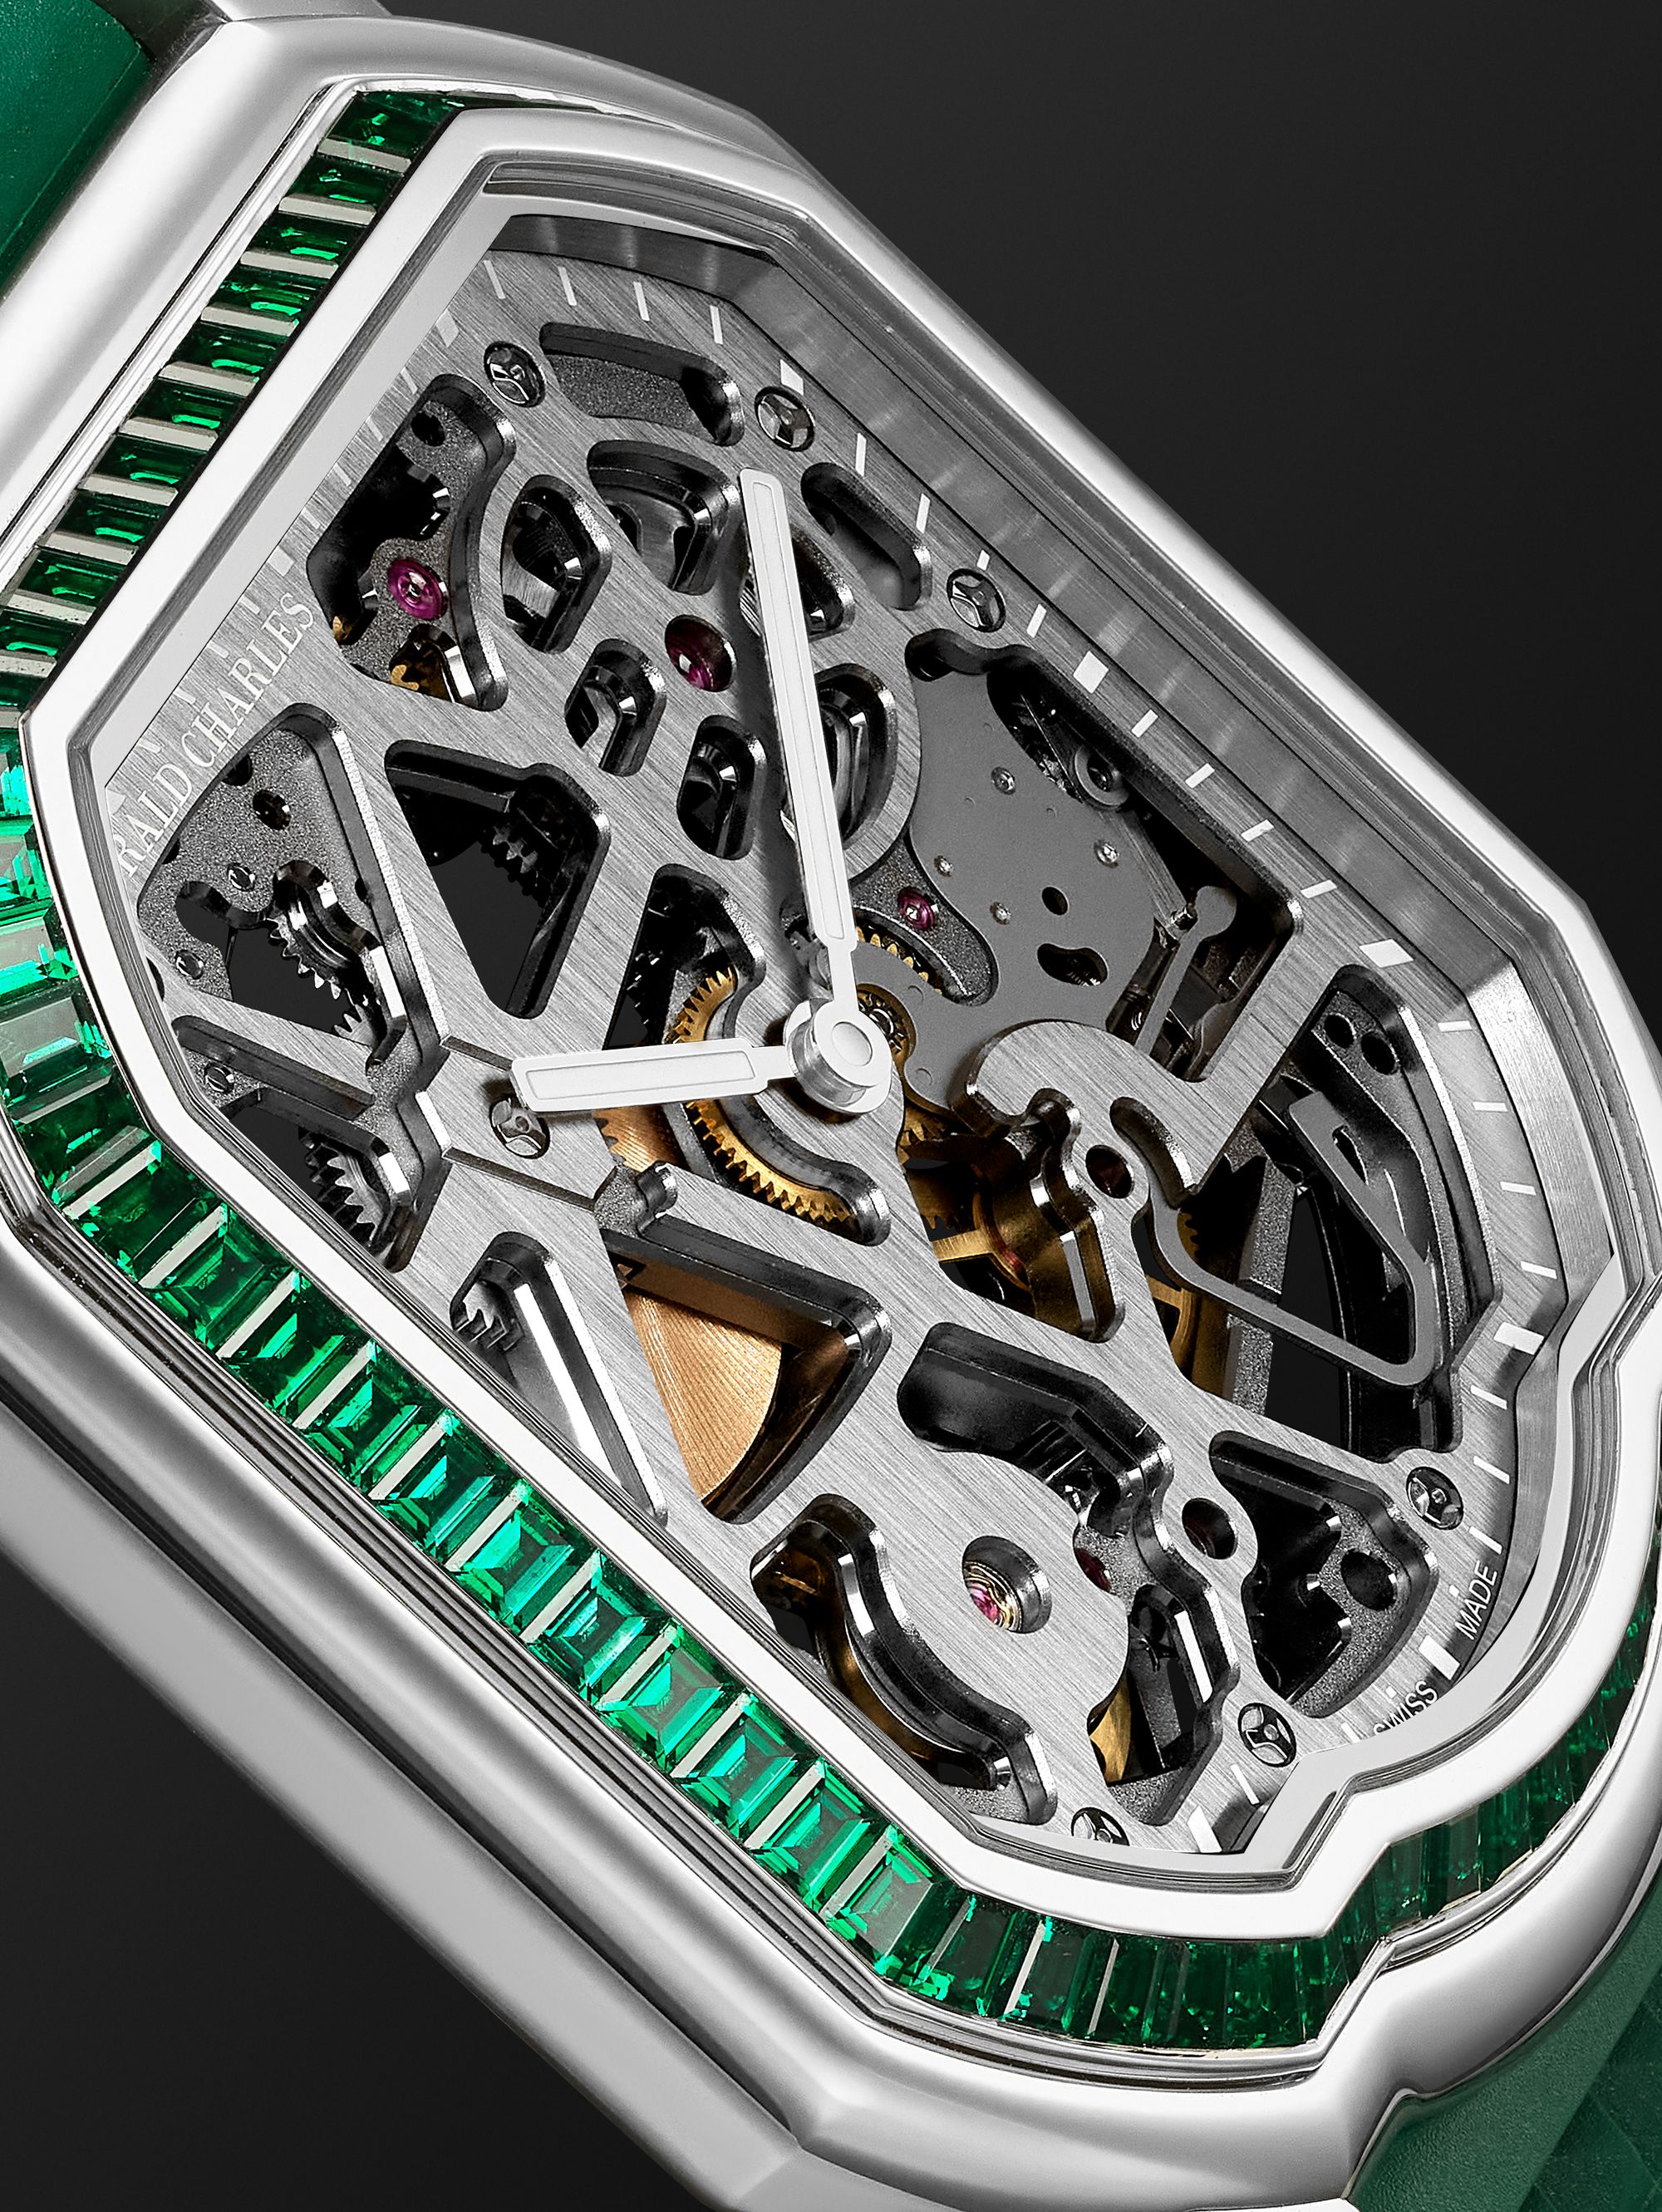 GERALD CHARLES + Octavio Garcia Maestro 8.0 Squelette Limited Edition 39mm Automatic Stainless Steel, Rubber and Emerald Watch, Ref. No. GC8.0-SQ-A-00-E1517236E